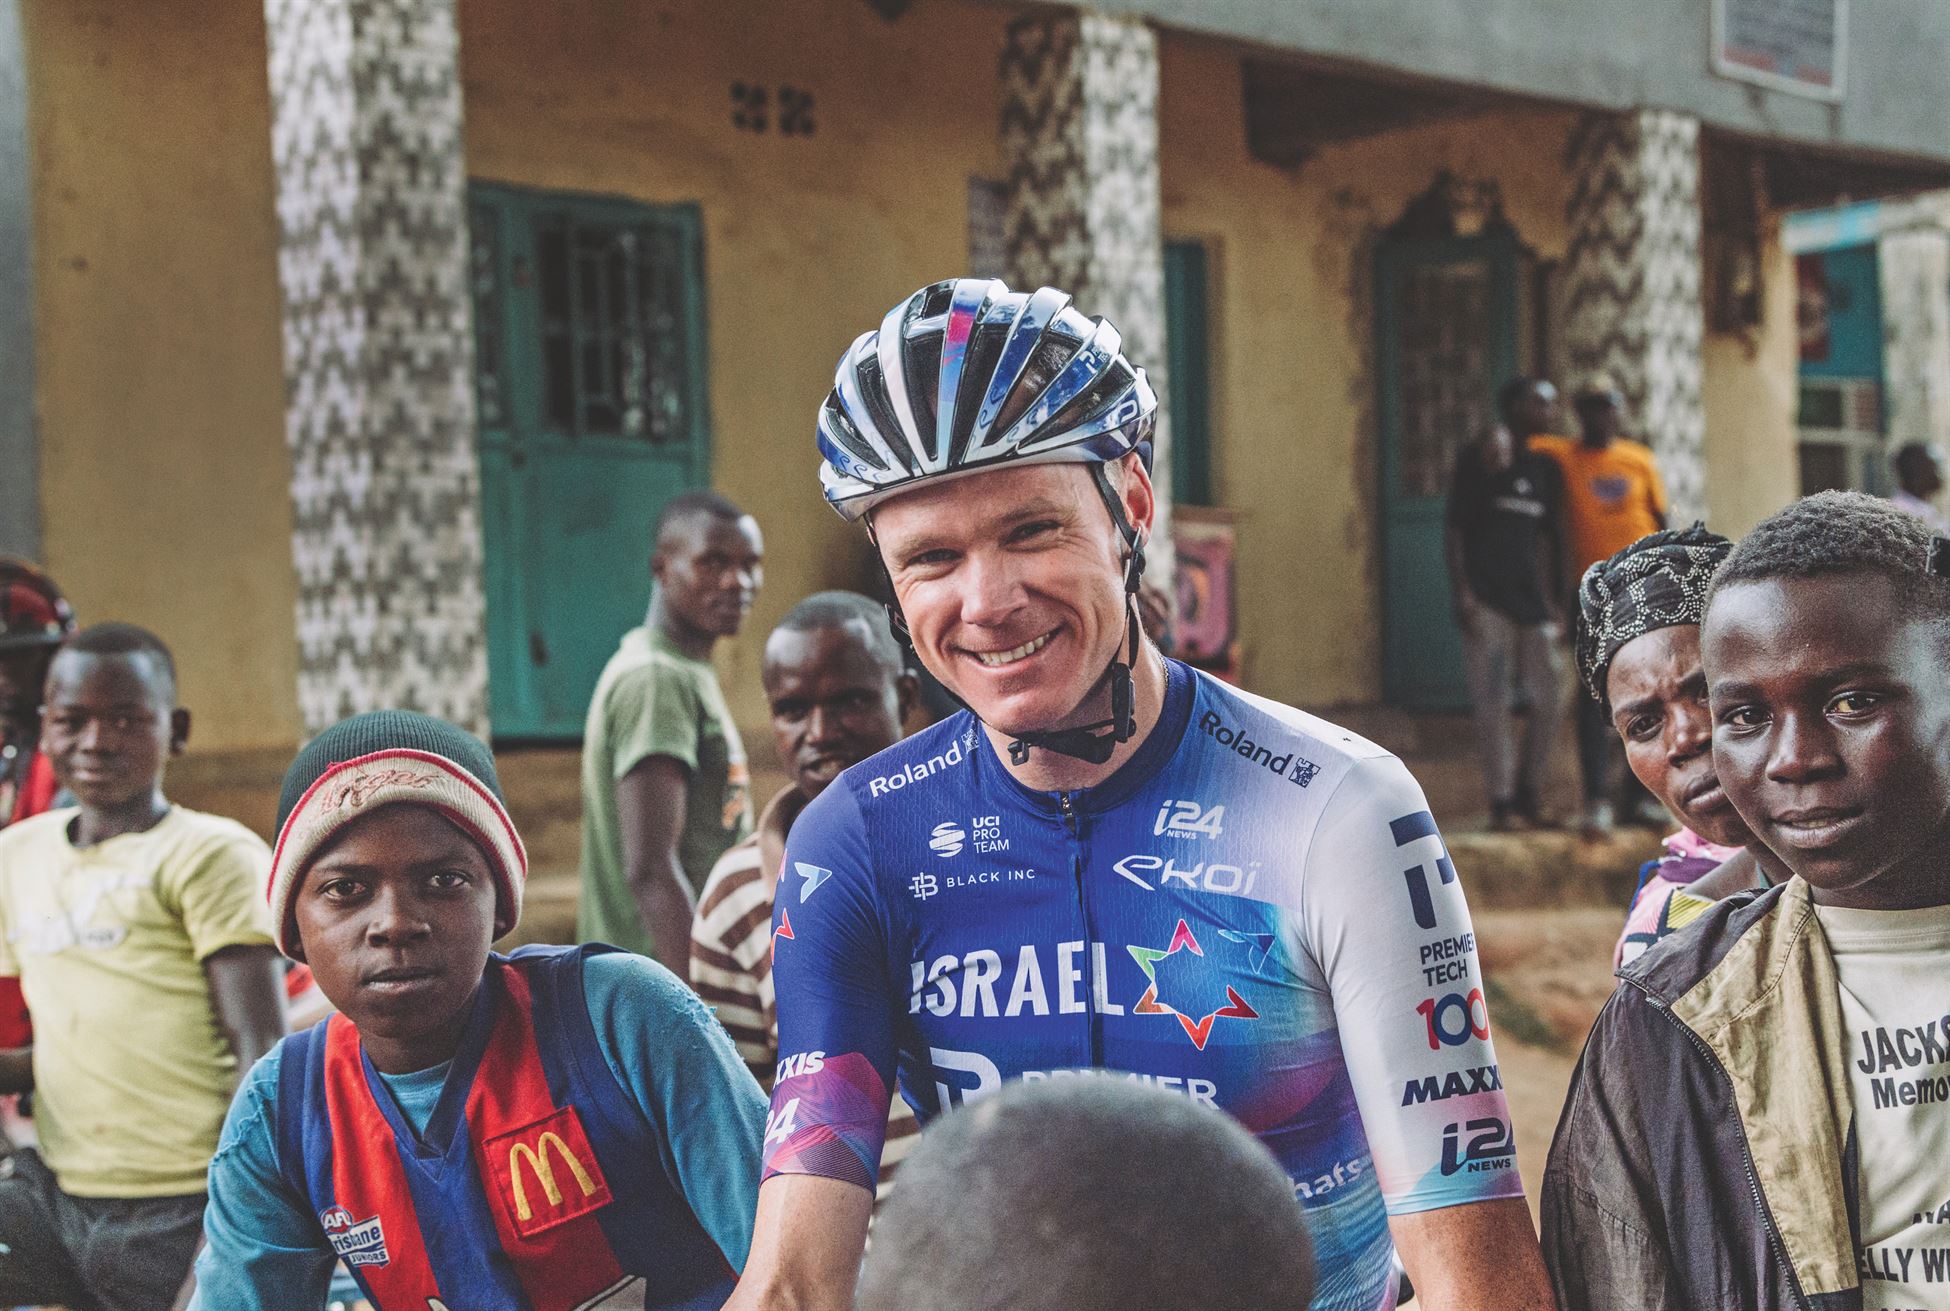 Back to Africa: Chris Froome on going back to his roots, his future and cycling's new generation